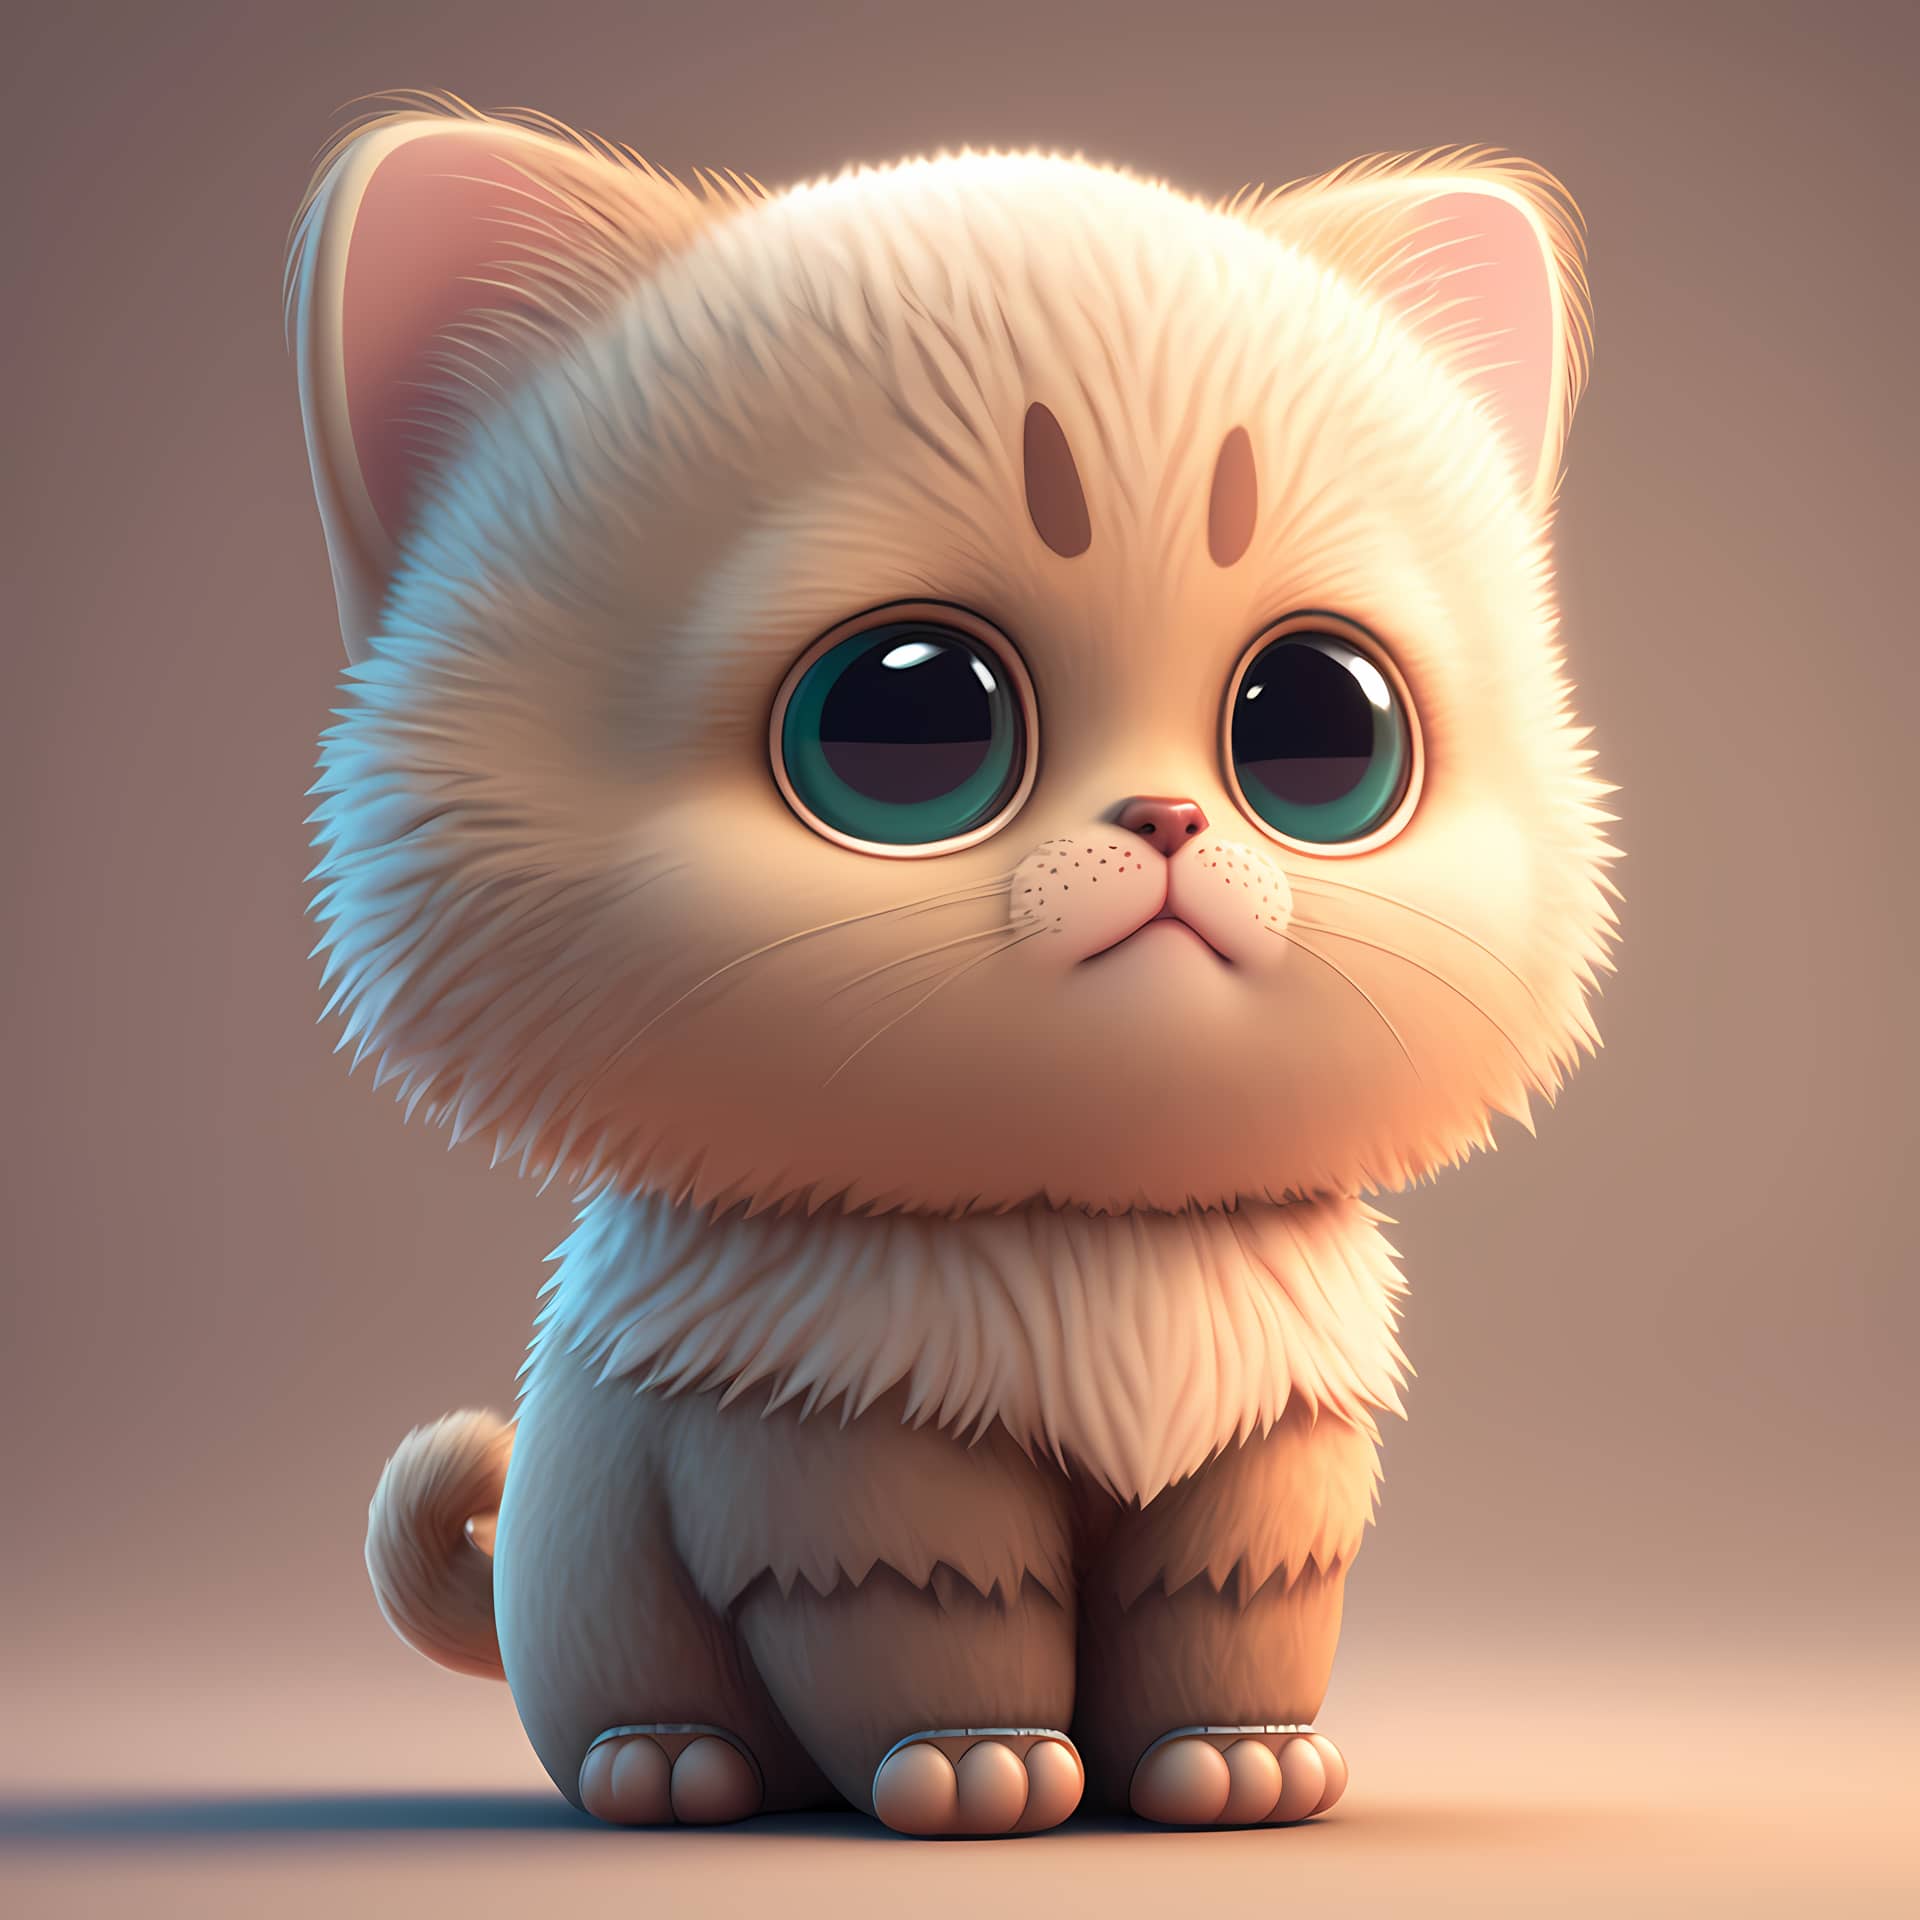 Adorable cute chubby cat 3d render excellent image